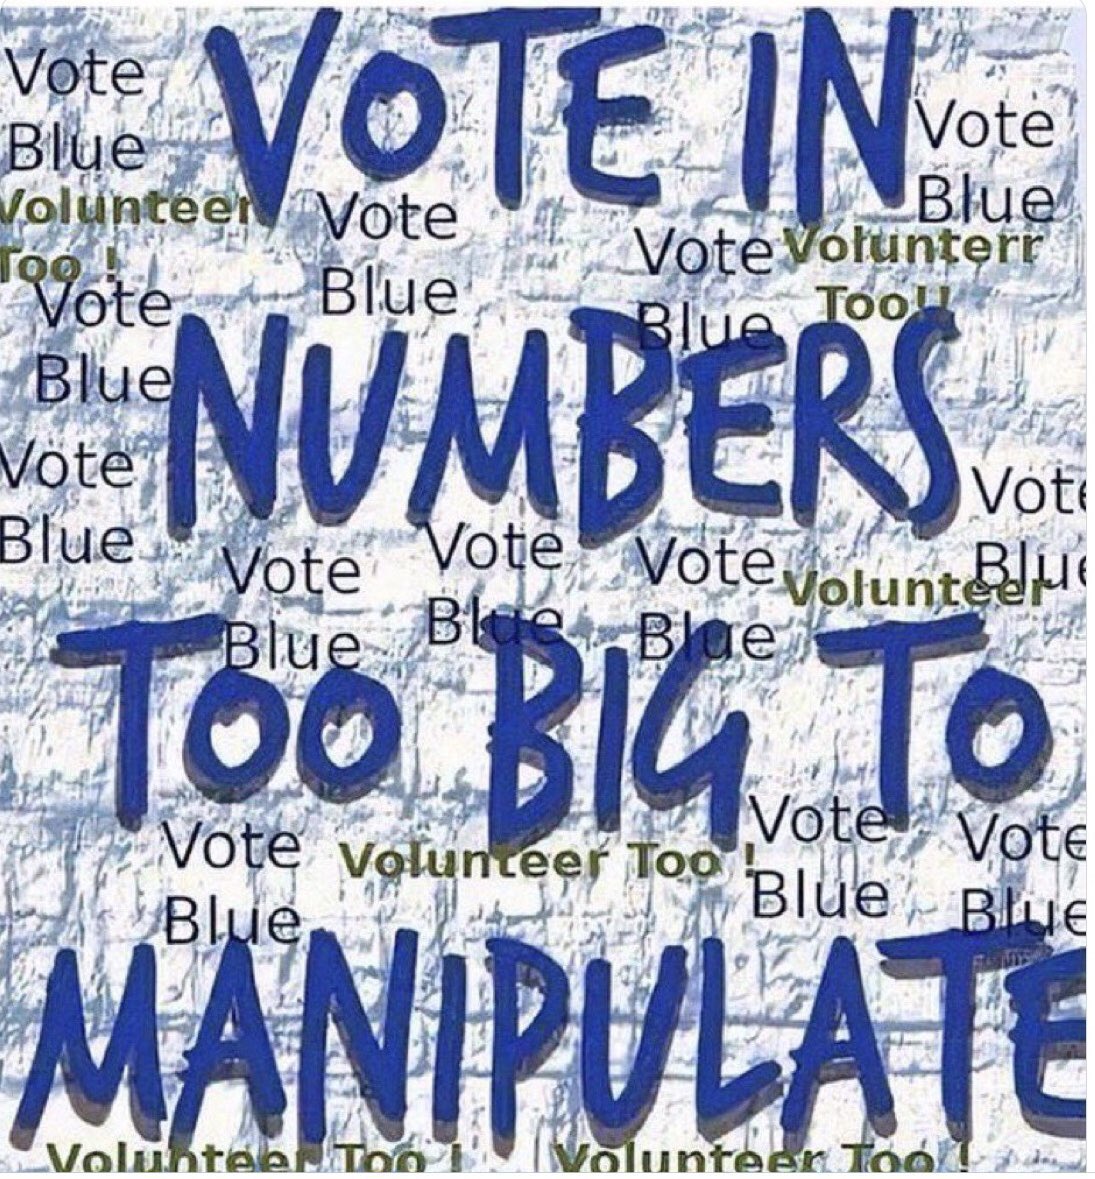 @Len_Future Hi Len! Great resisters on every list! 💙💙💙
We must remember to #GetTheVoteOut and #VoteBlueEveryElection!!! 
Have the best night, my friend! 💙🐰